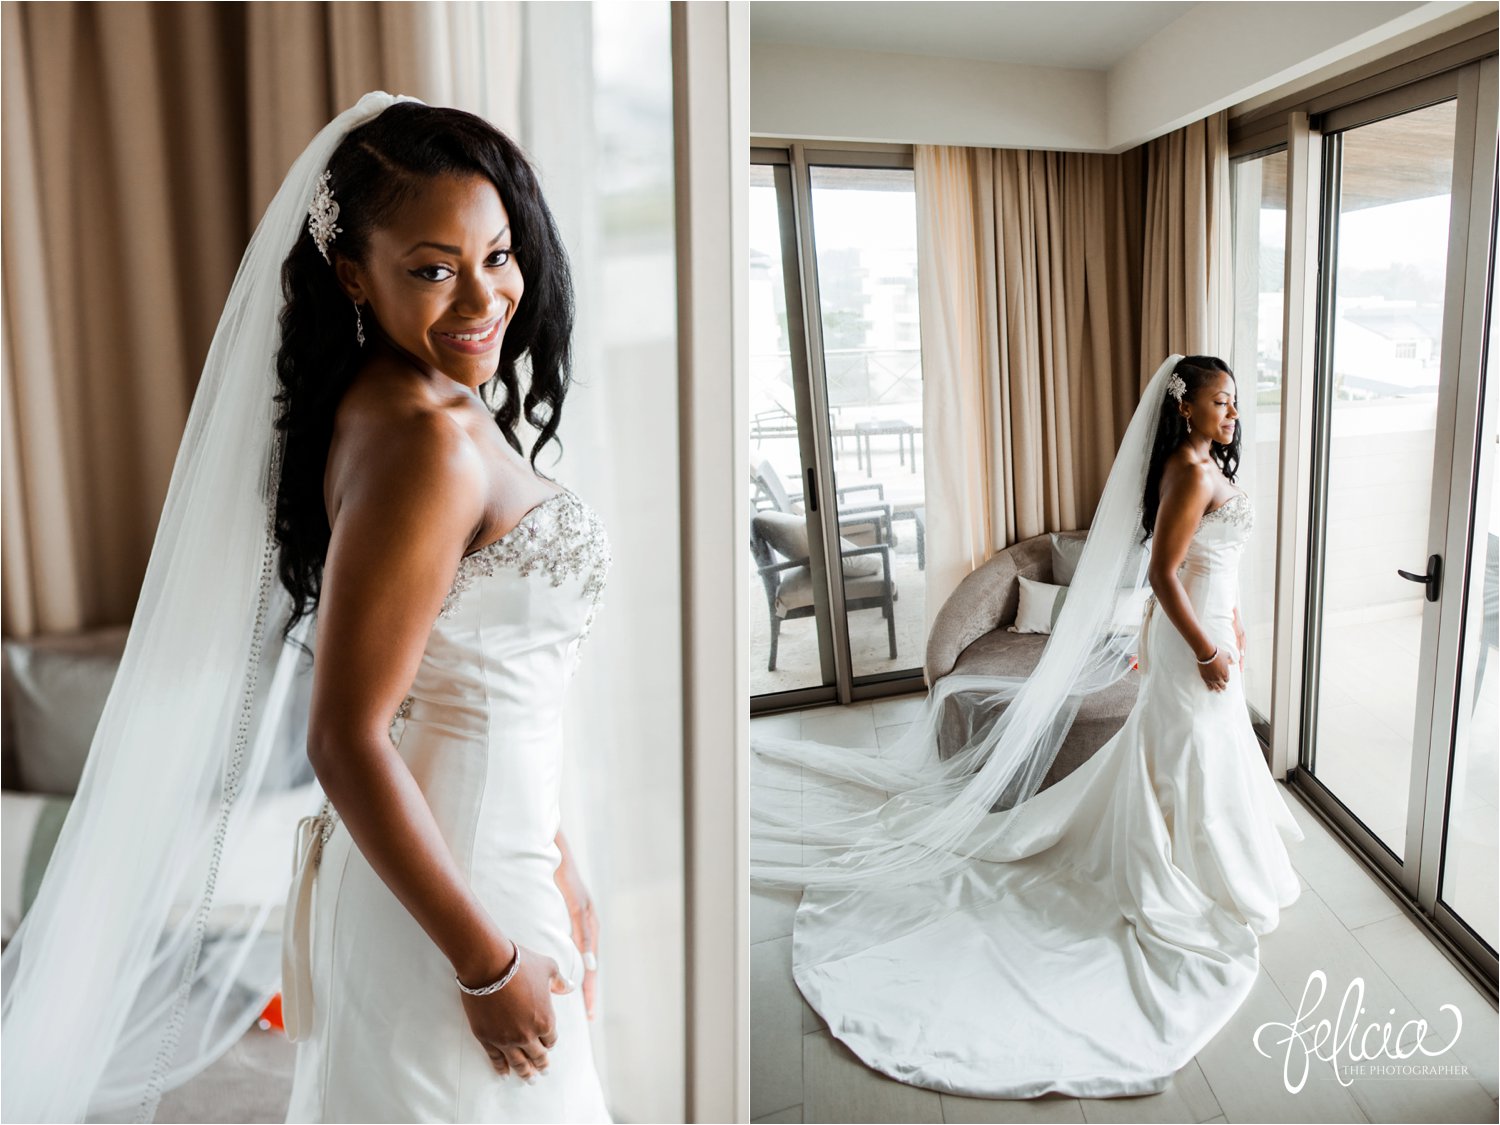   images by feliciathephotographer.com | destination wedding photographer | st lucia | l&s travel | the Royalton | getting ready | putting on the dress | details | beaded bodice | kleinfeld | satin | natural makeup | 